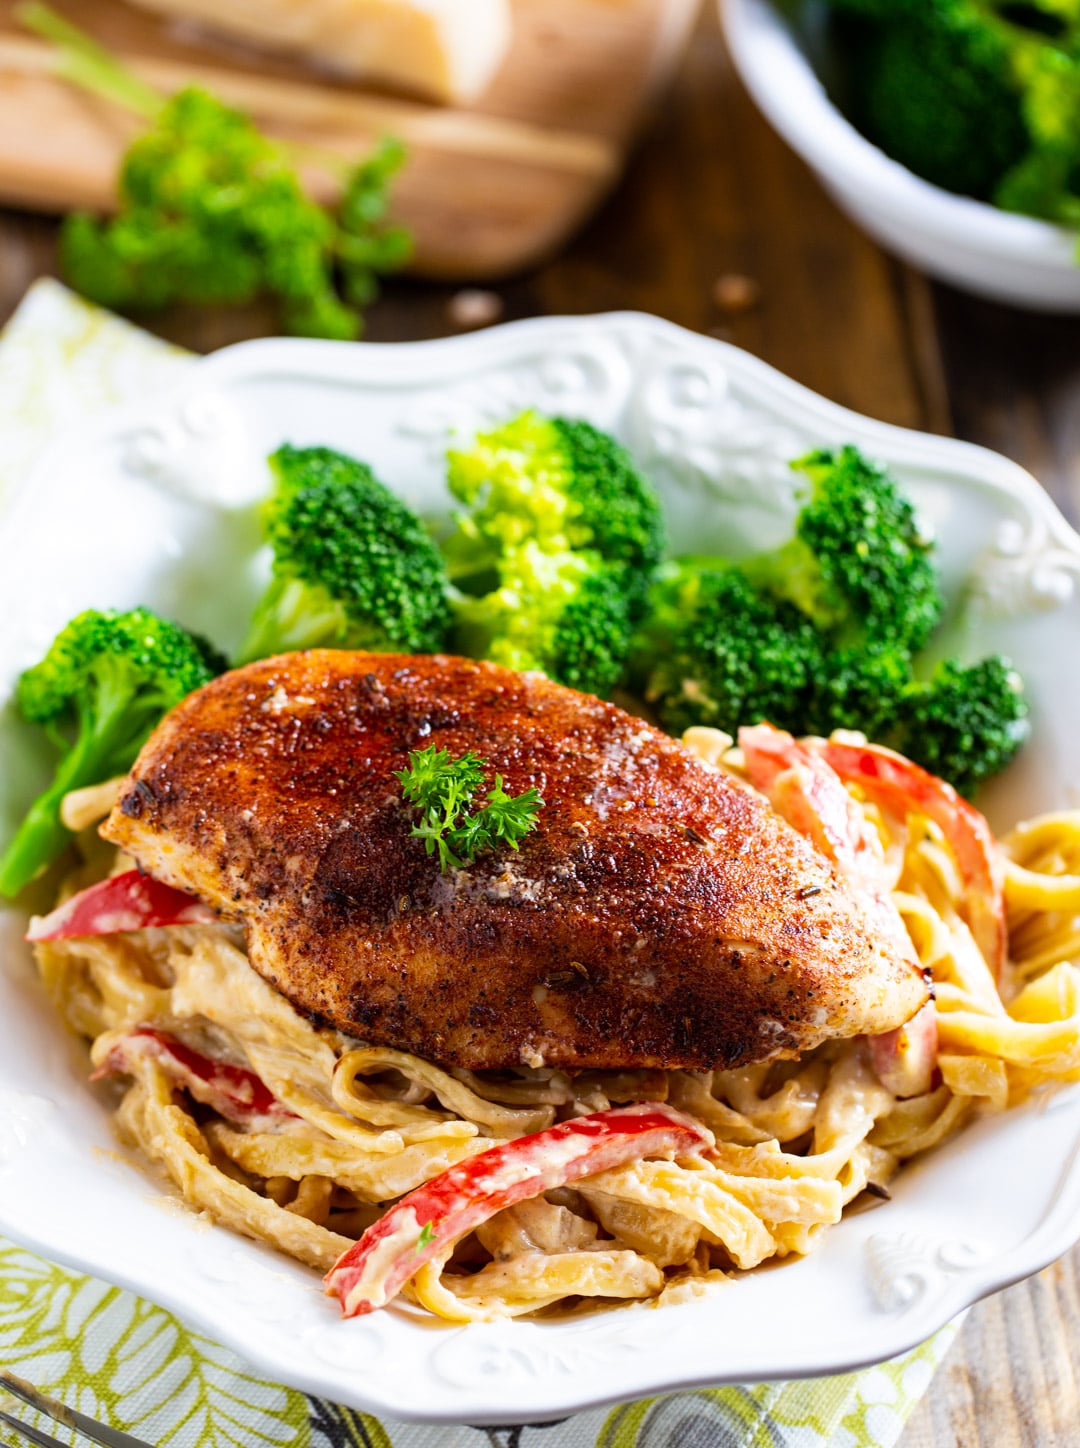 Blackened Chicken Fettuccine in a bowl with steamed broccoli.